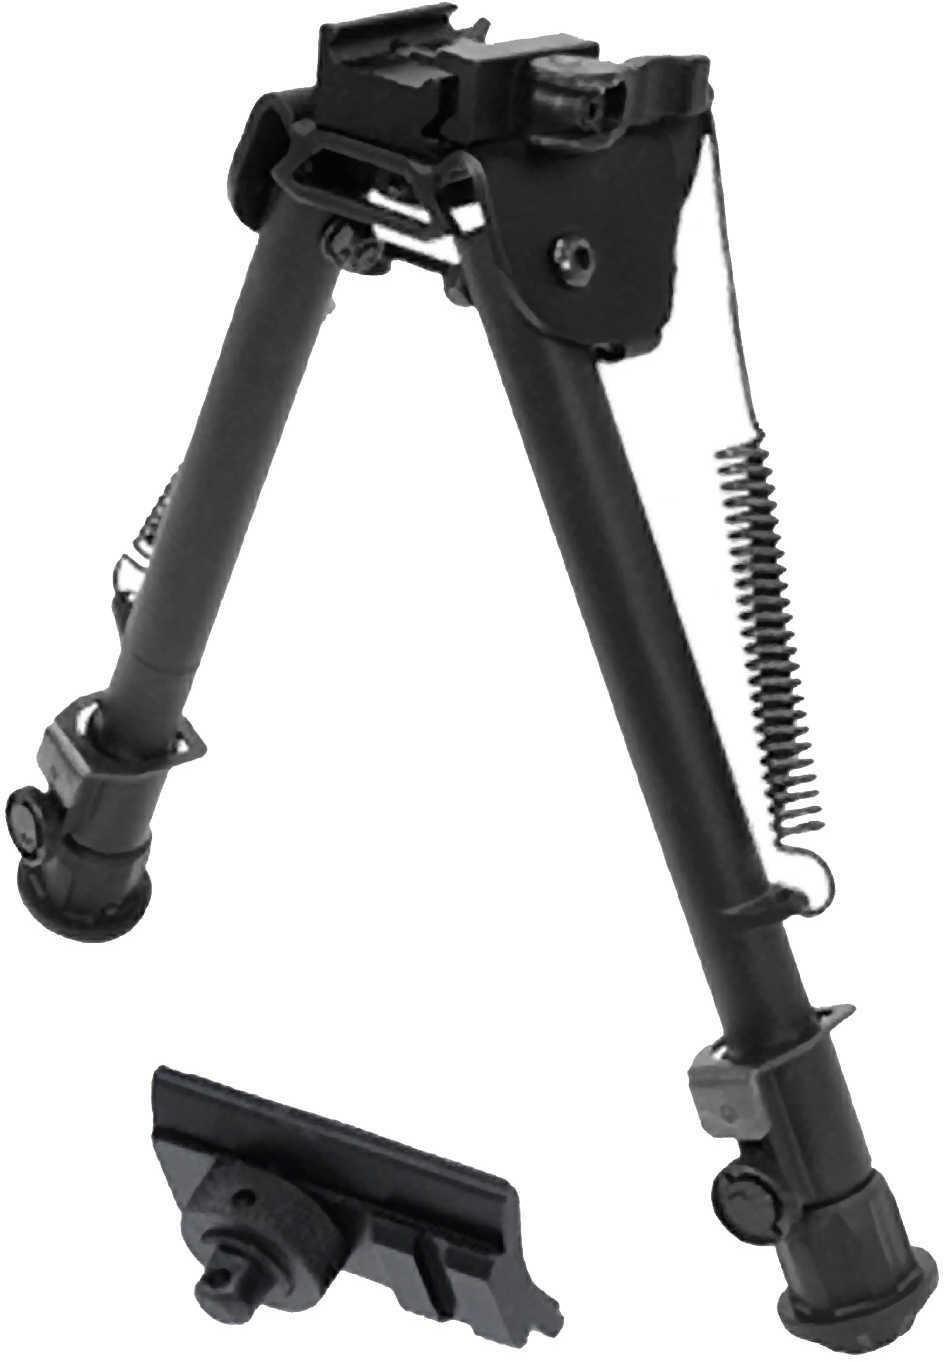 Leapers Inc. - UTG Tactical Op Bipod Fits Picatinny or Weaver Rail 8" - 12.4" with QD Lever Mount Black TL-BP88Q